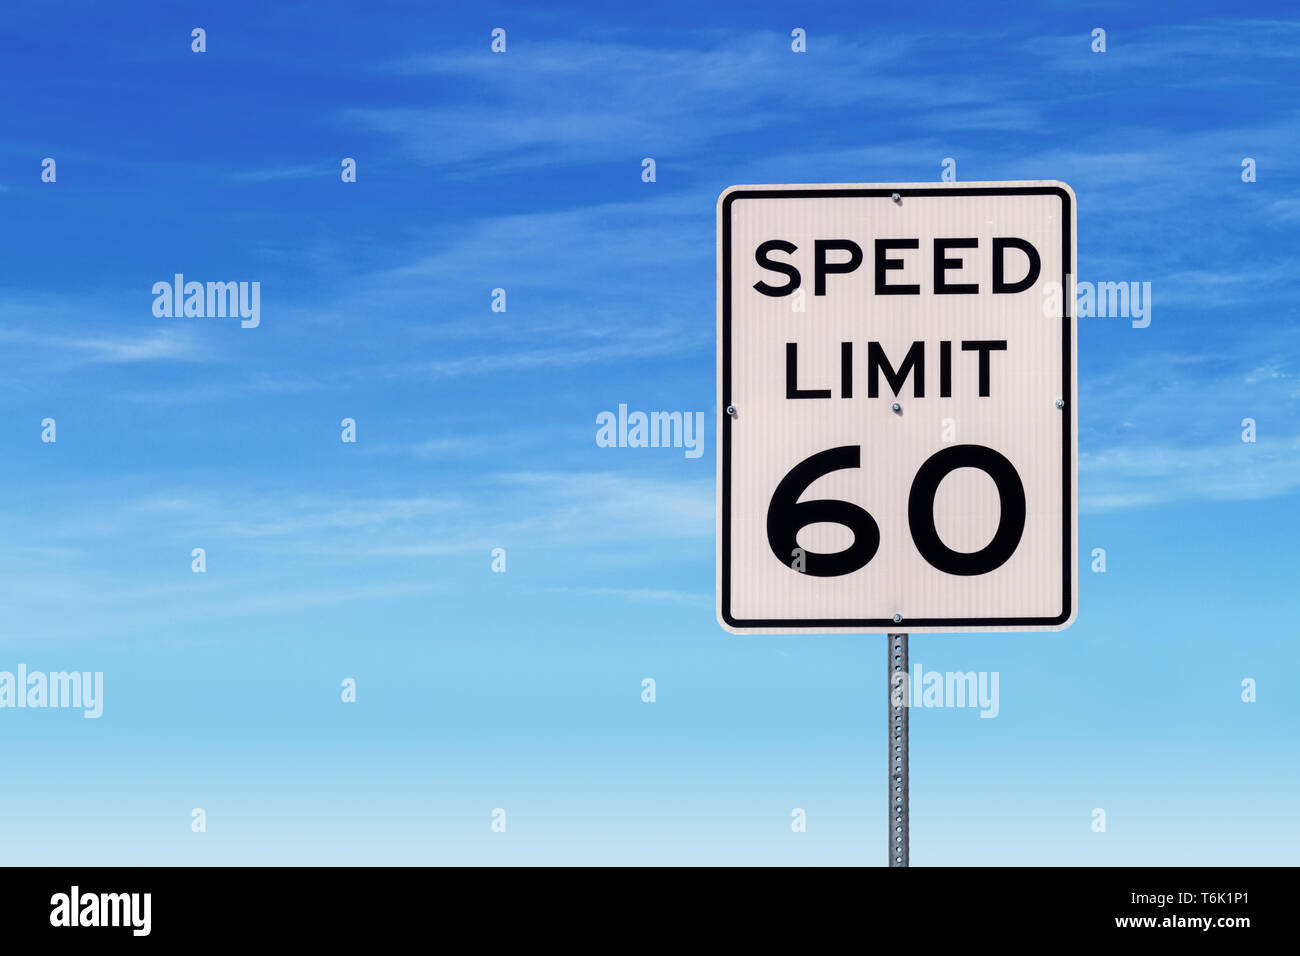 Speed Limit 60 Road Sign Stock Photo